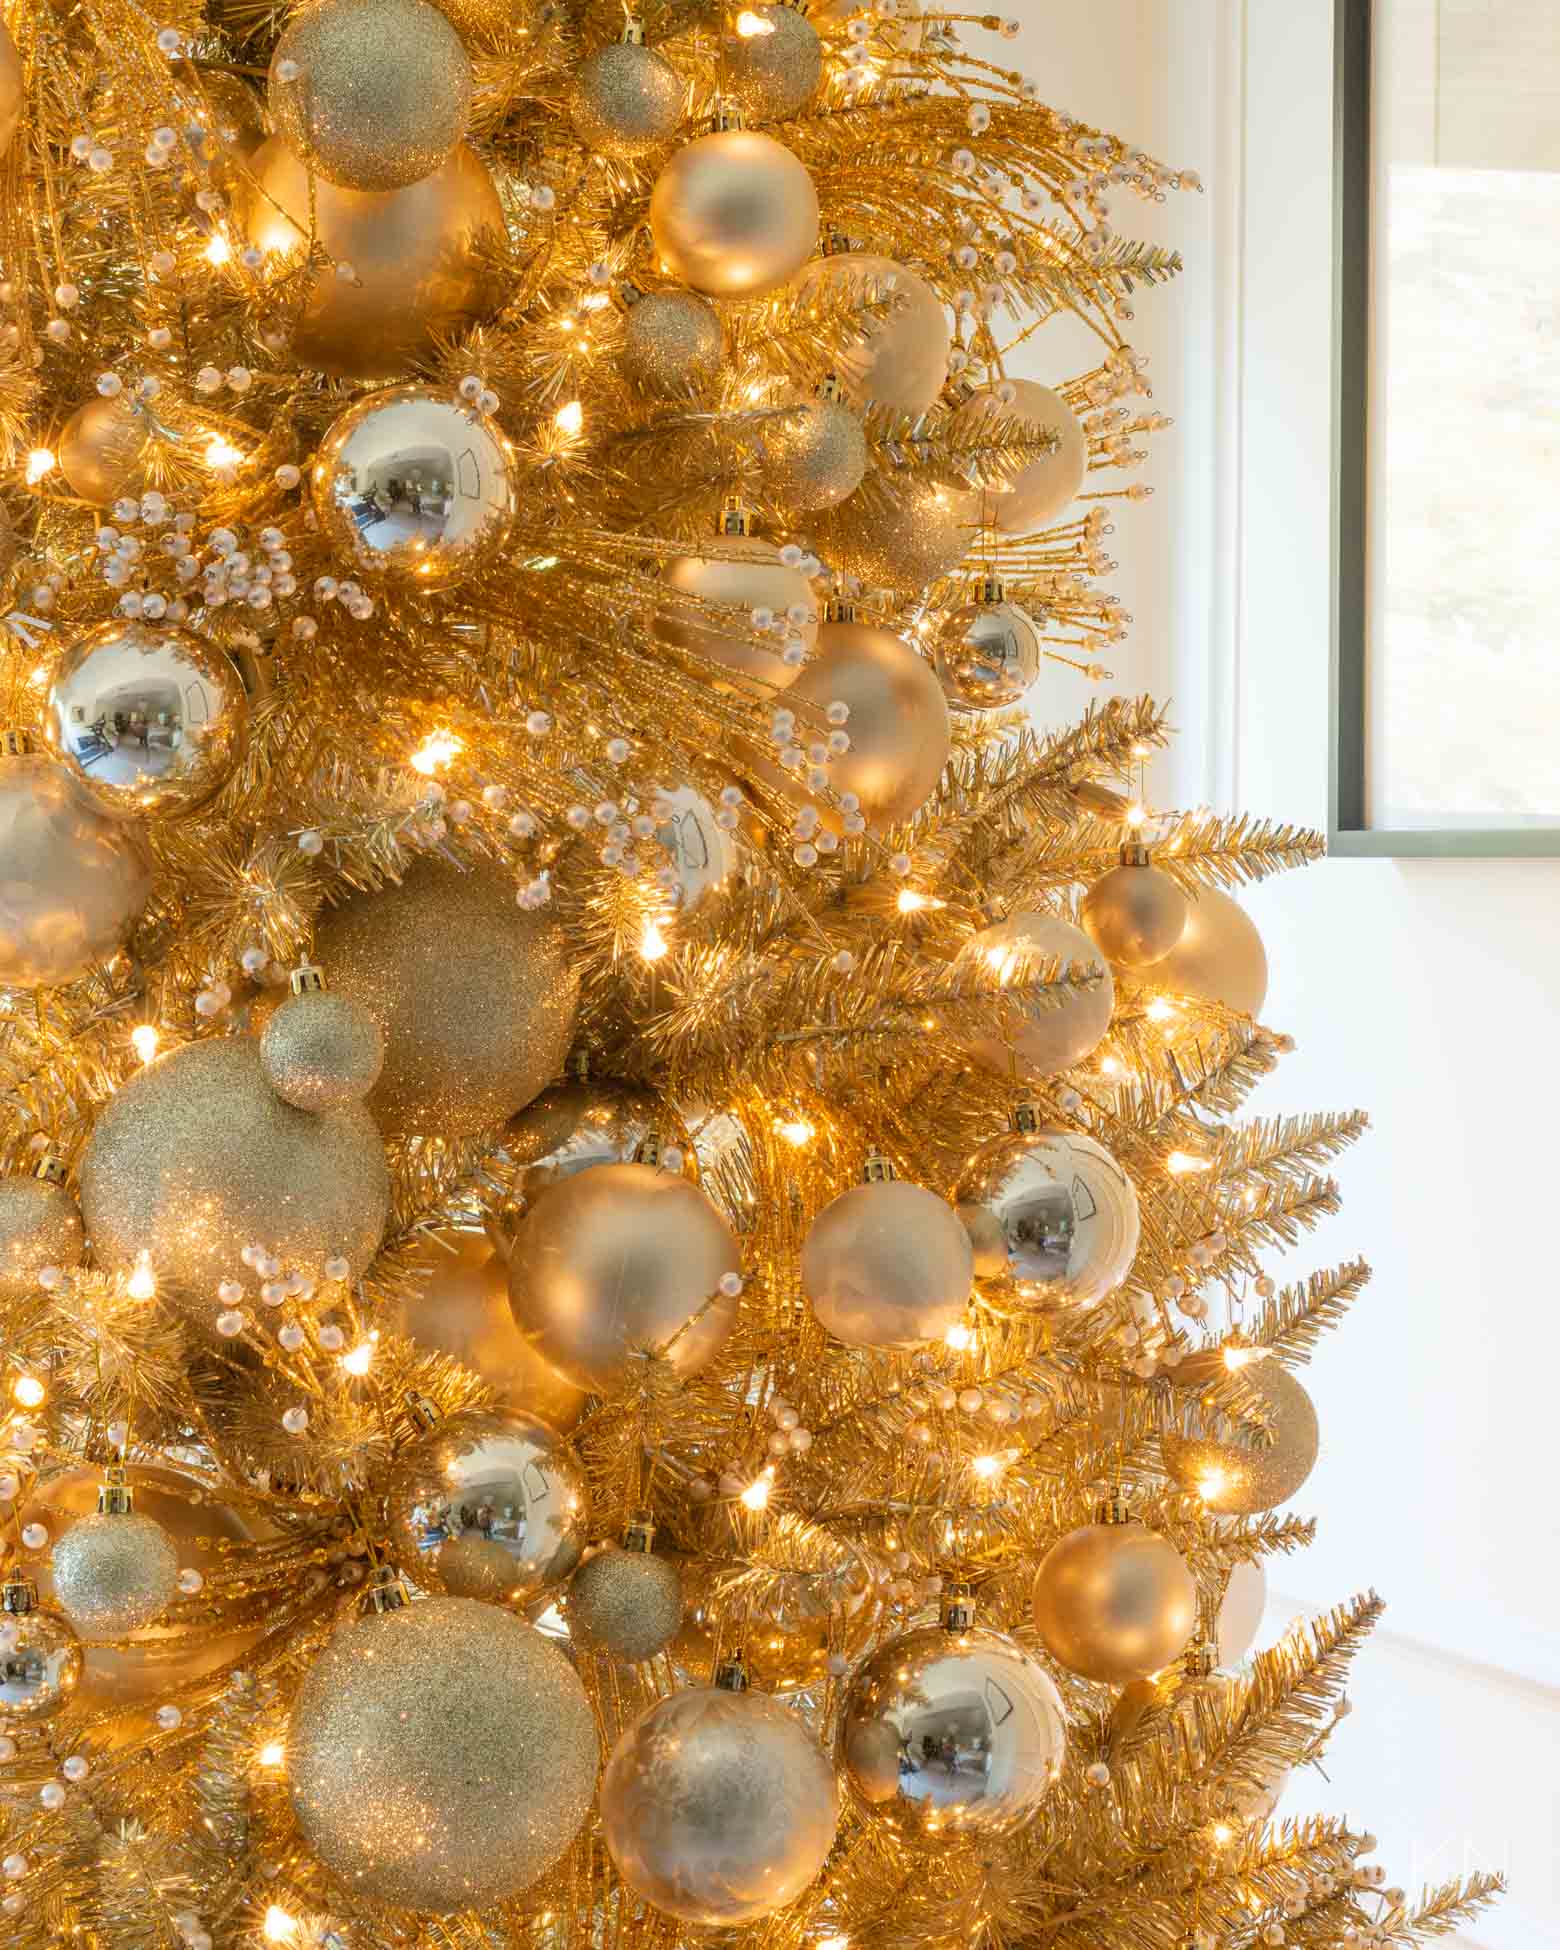 2021 Christmas Home Tour -- Gold Christmas Tree in the Bedroom